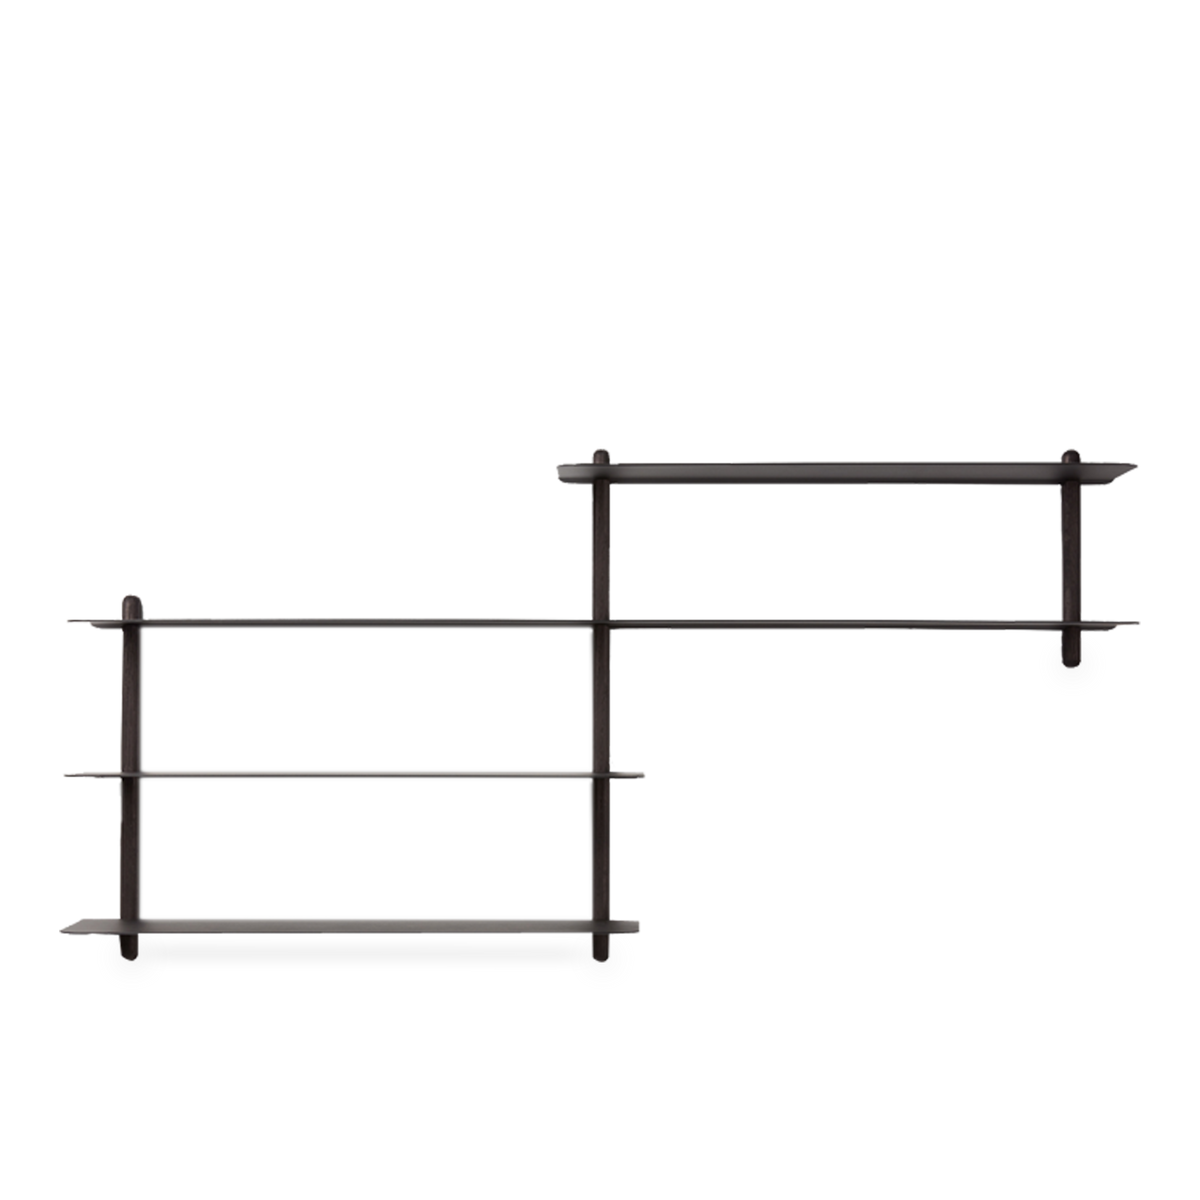 Made of ash and steel, this wall shelf is both subtle in its appearance and convincing in its simplicity.